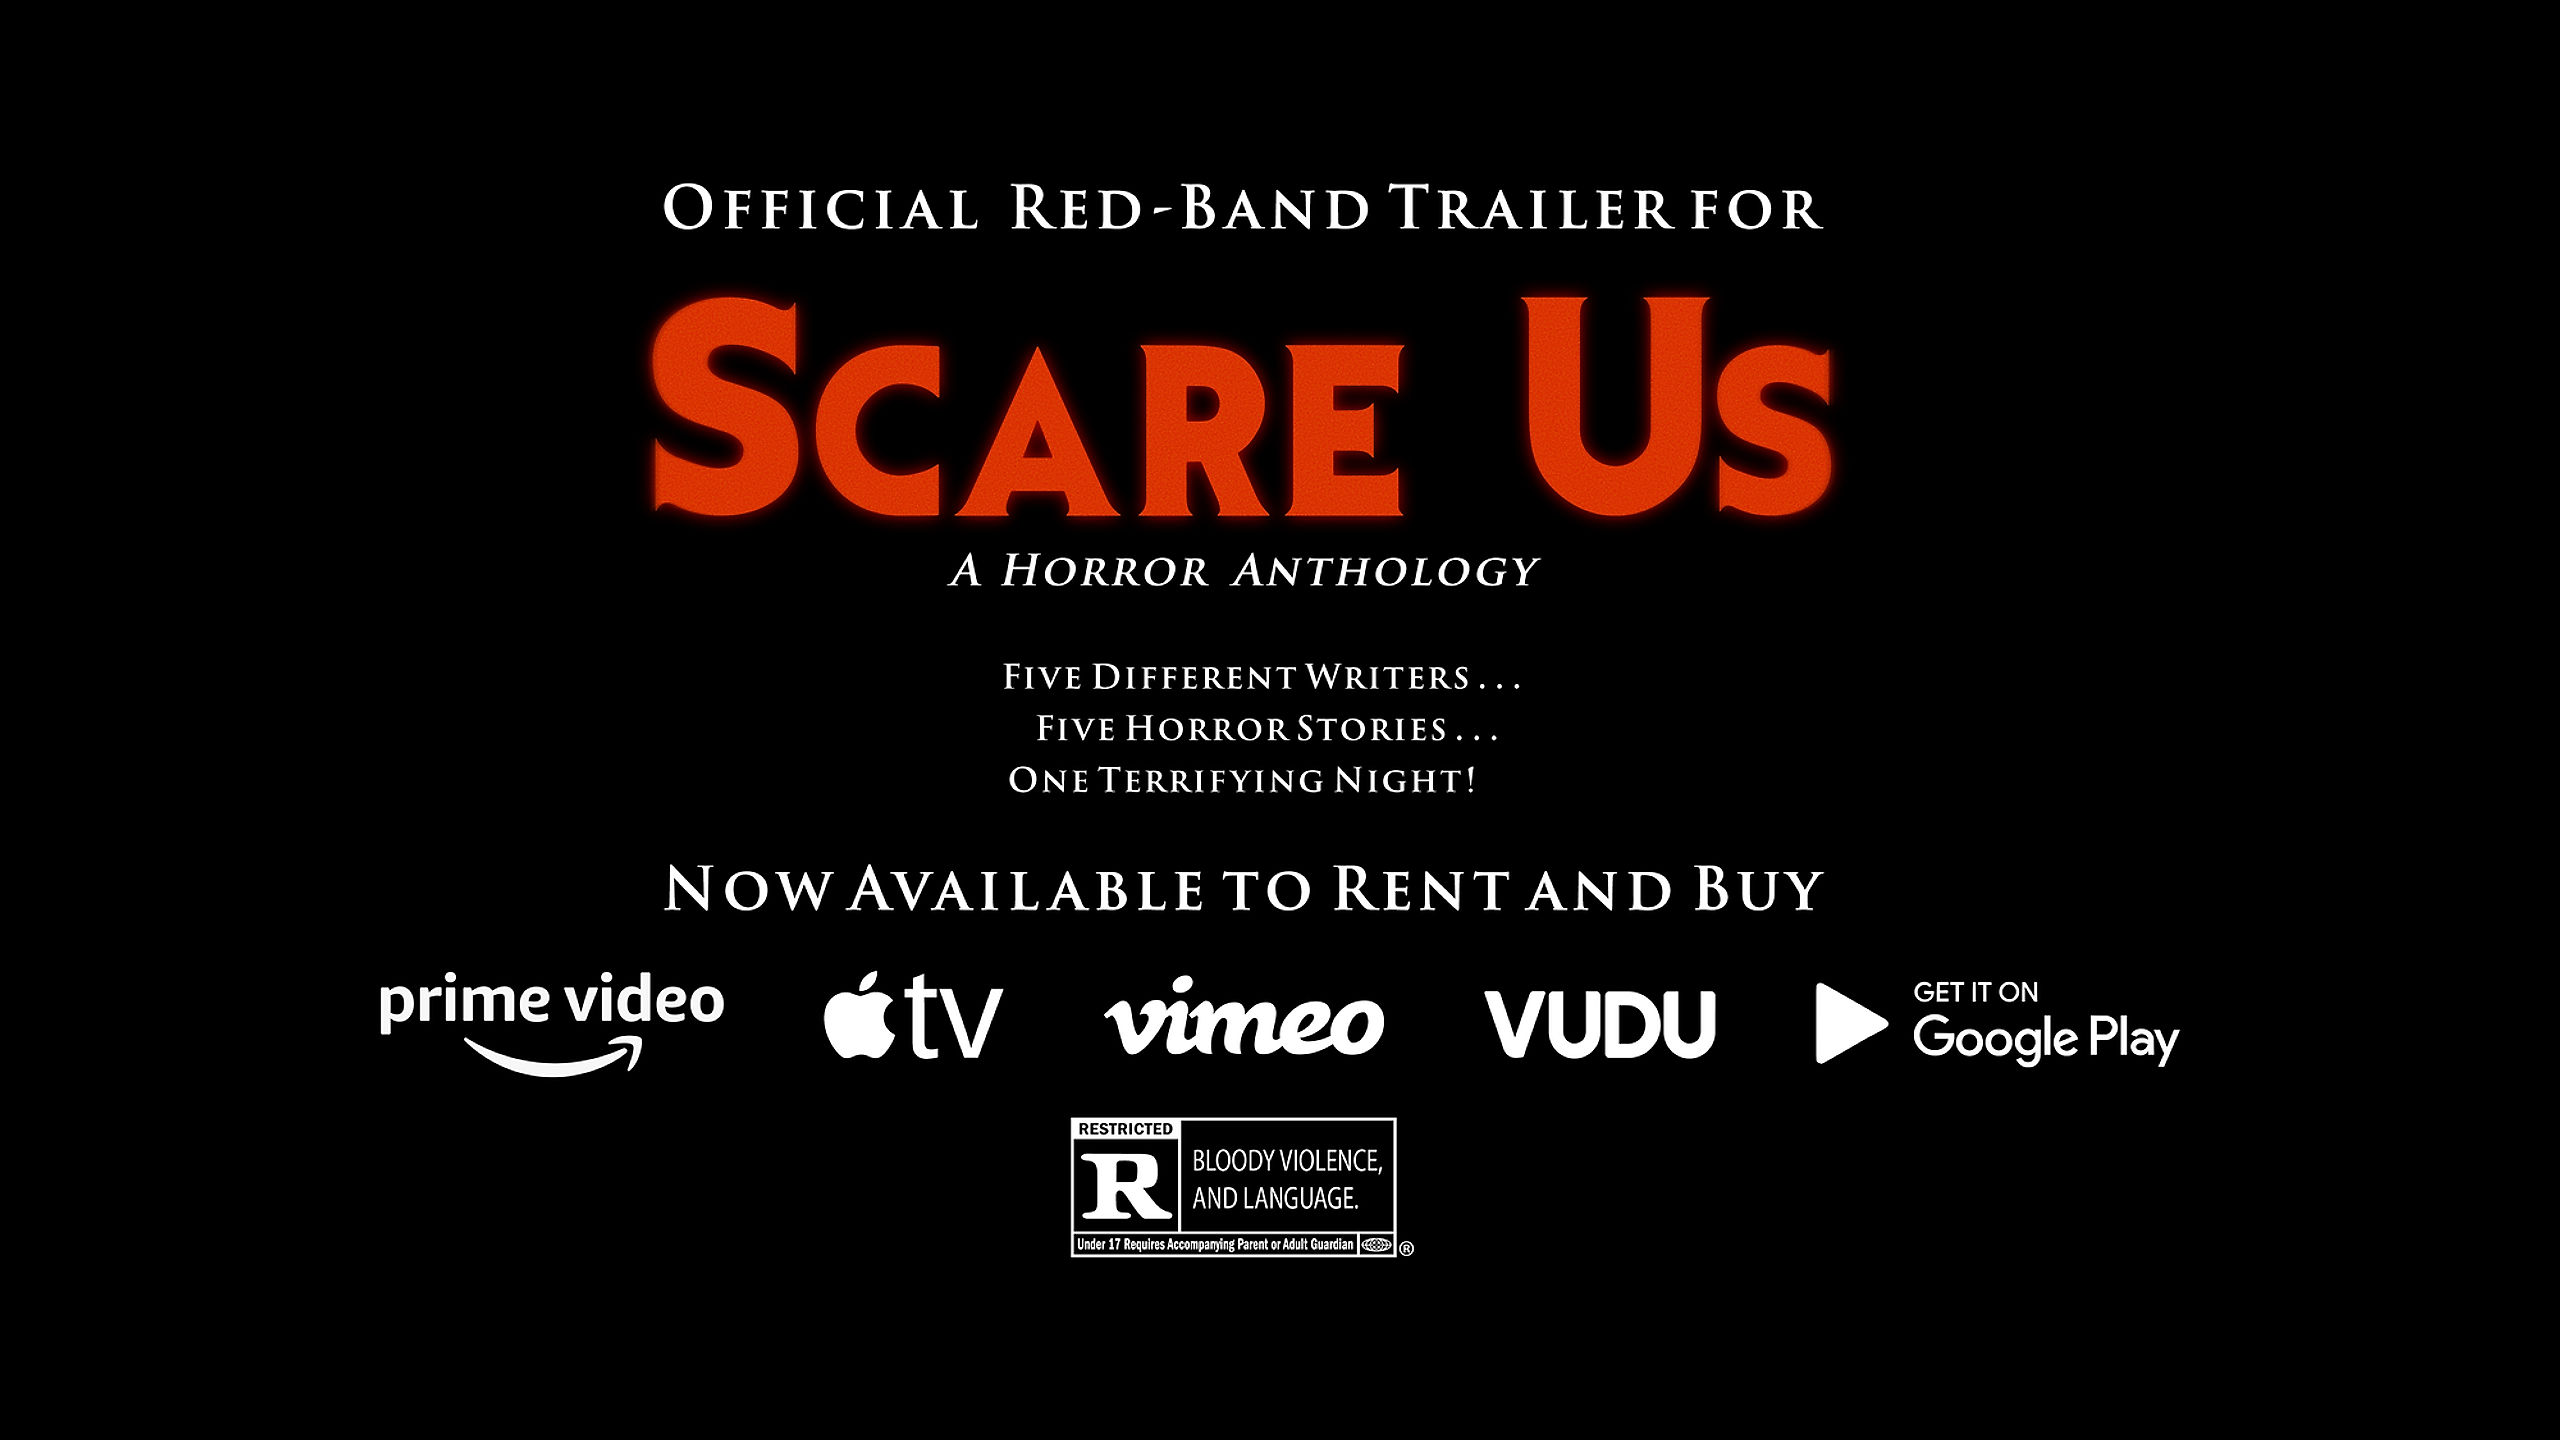 Scare Us - Full Length Red-Band Trailer